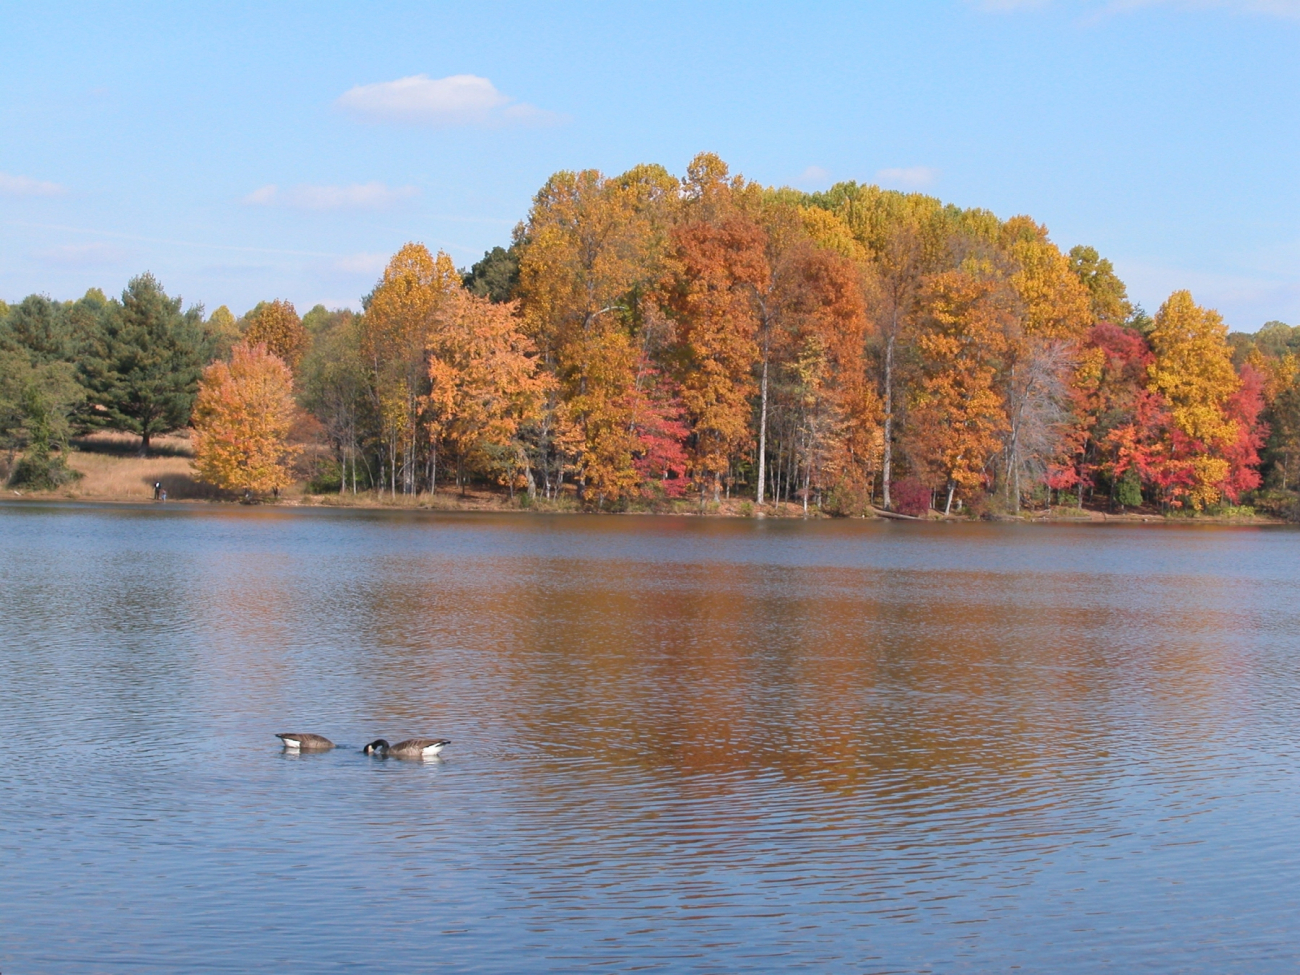 Canada geese and fall colors